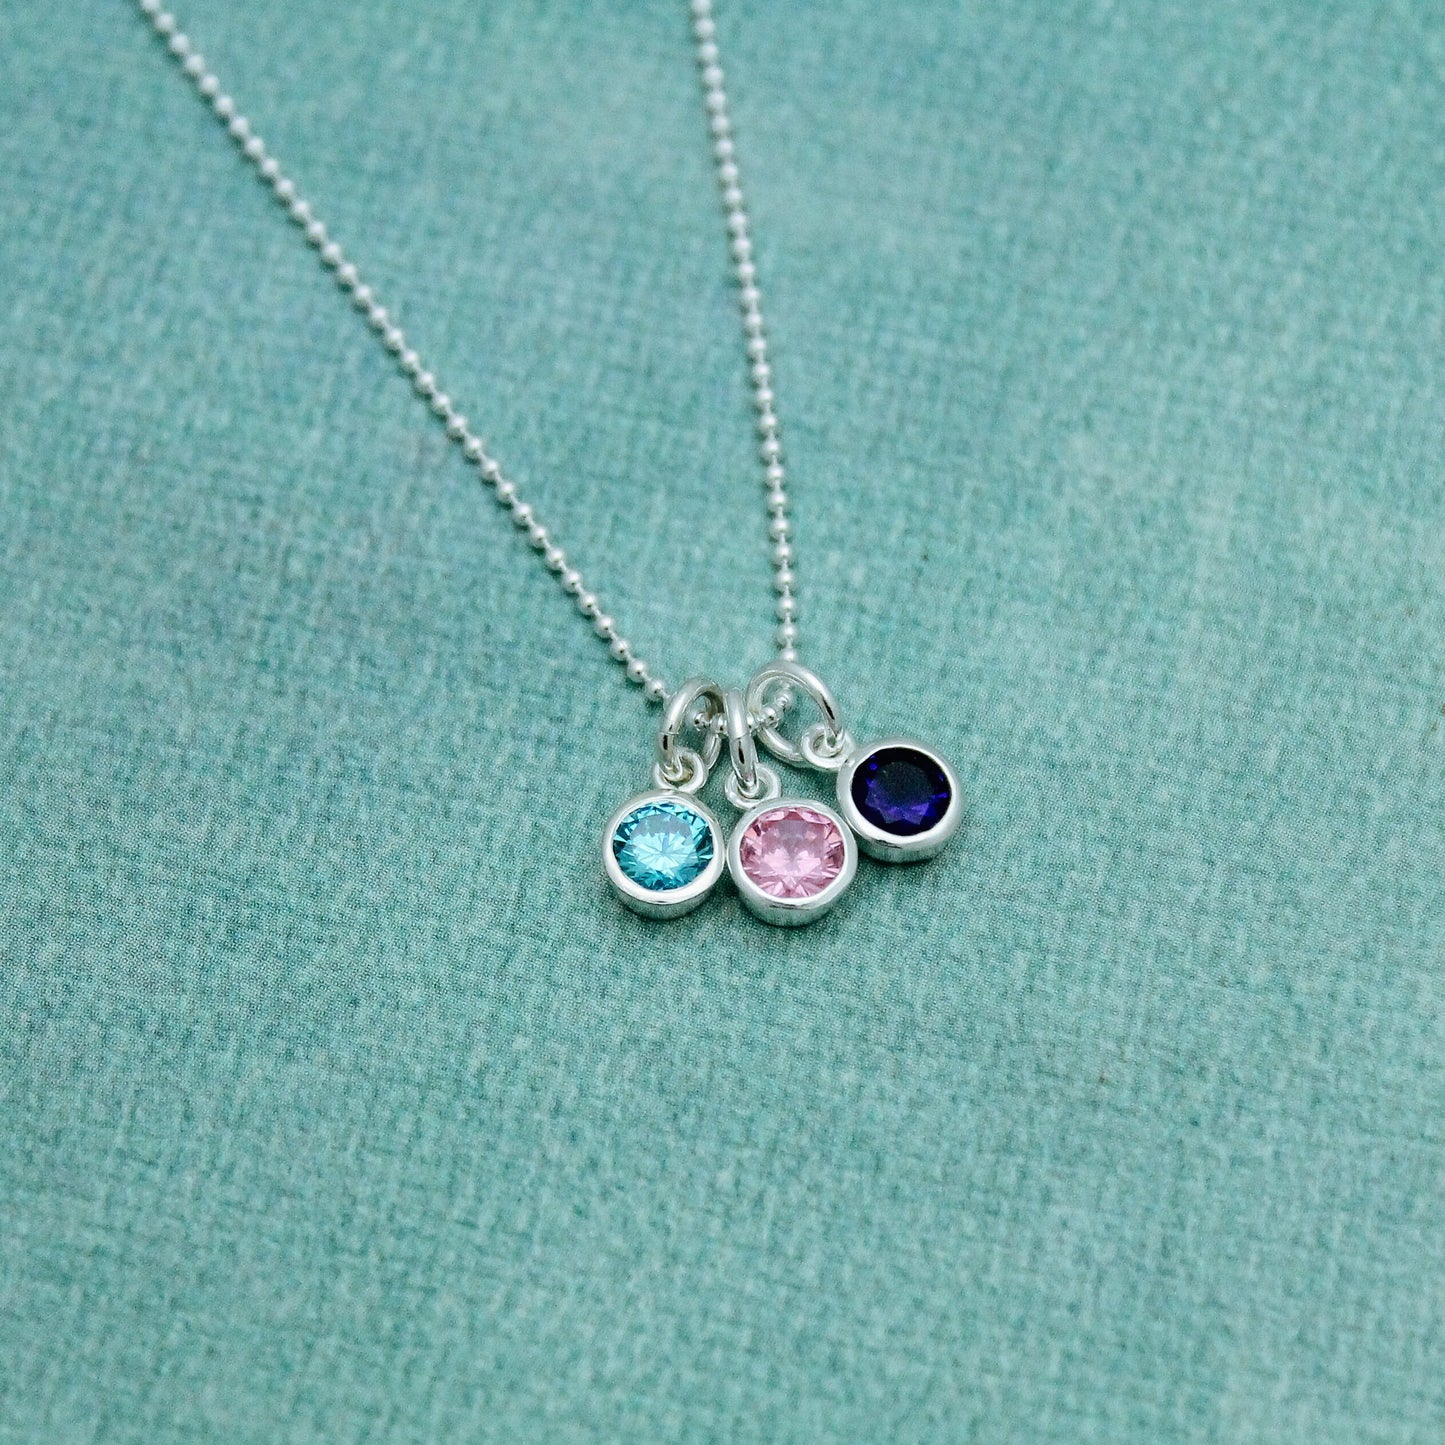 Personalized Sterling Silver Birthstone Necklace, Grandma Necklace, Mother Birthstone Jewelry, Grandmother Birthstone Jewelry, Mother's Day